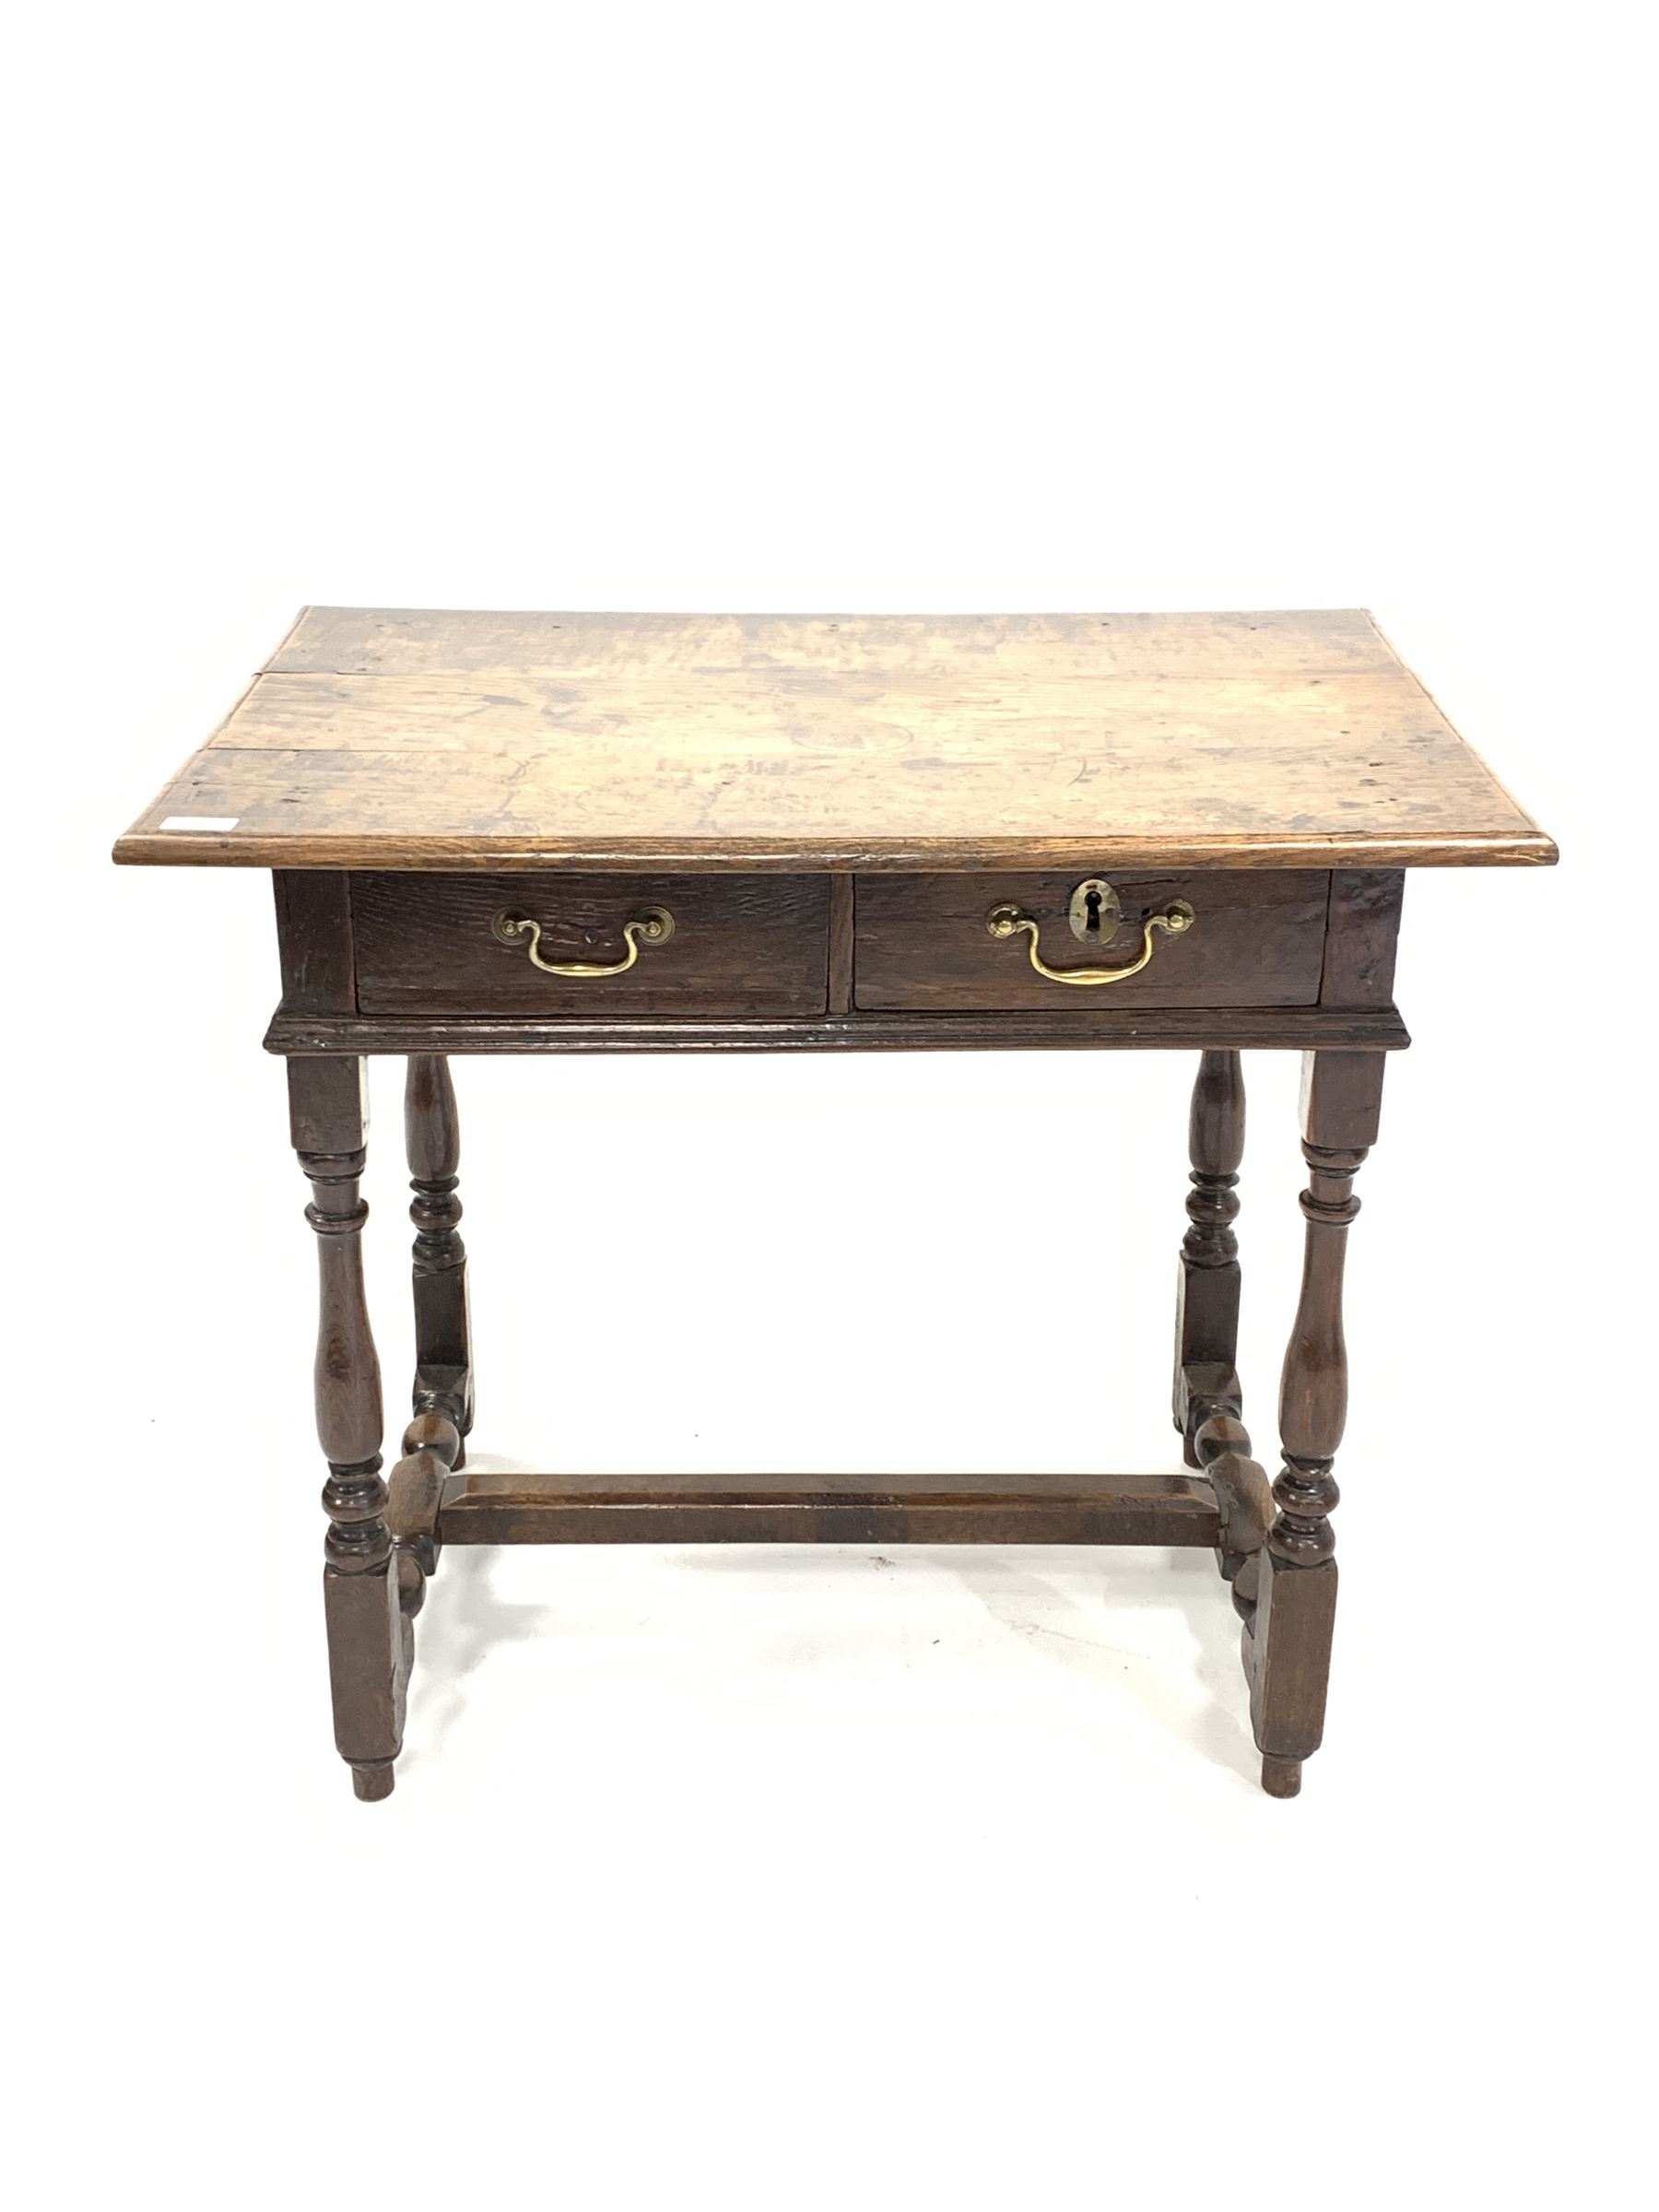 18th century oak side table - Image 2 of 7